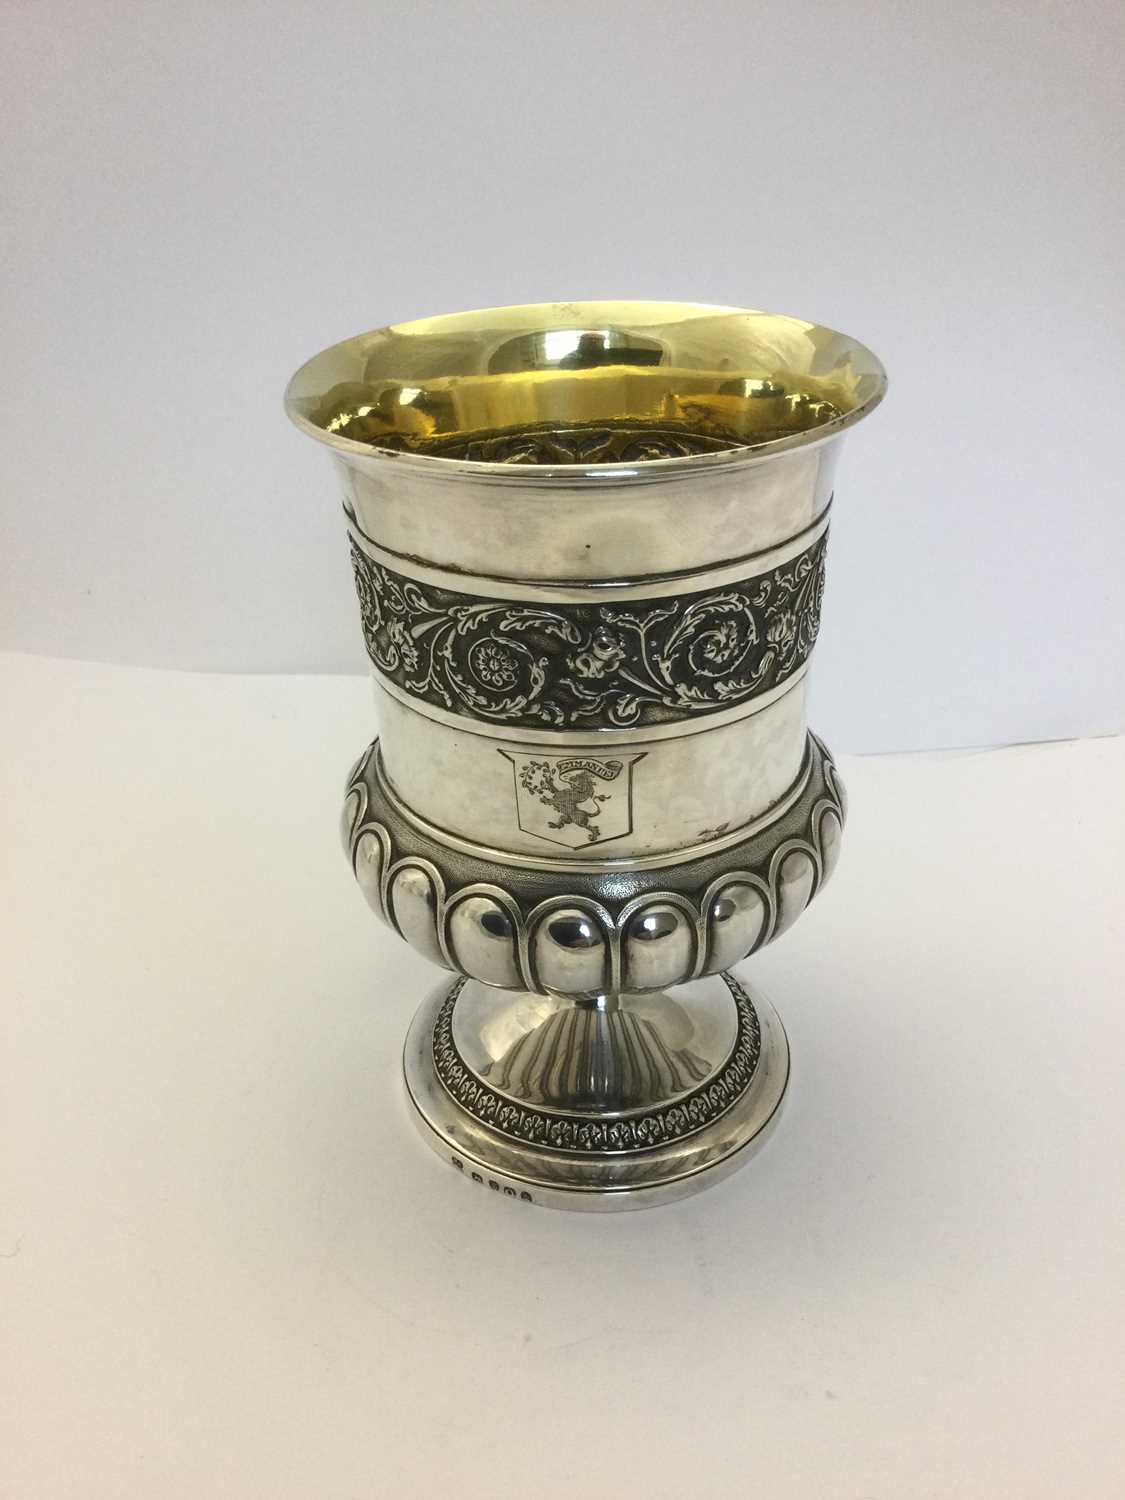 A George III Silver Goblet, by Rebecca Emes and Edward Barnard, London, 1811 - Image 3 of 8